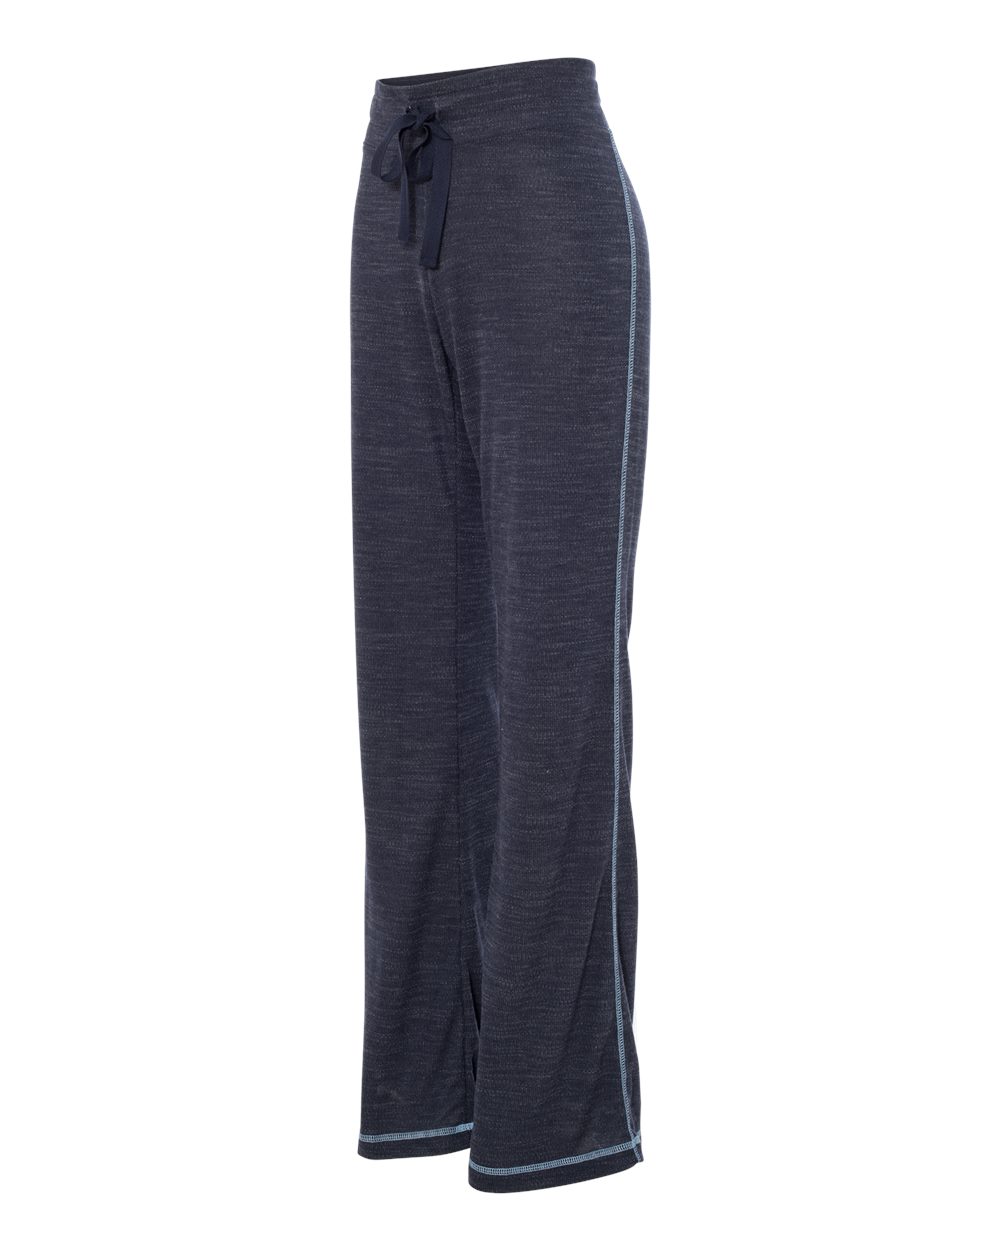 Boxercraft R10 - Women's French Terry Comfort Pants